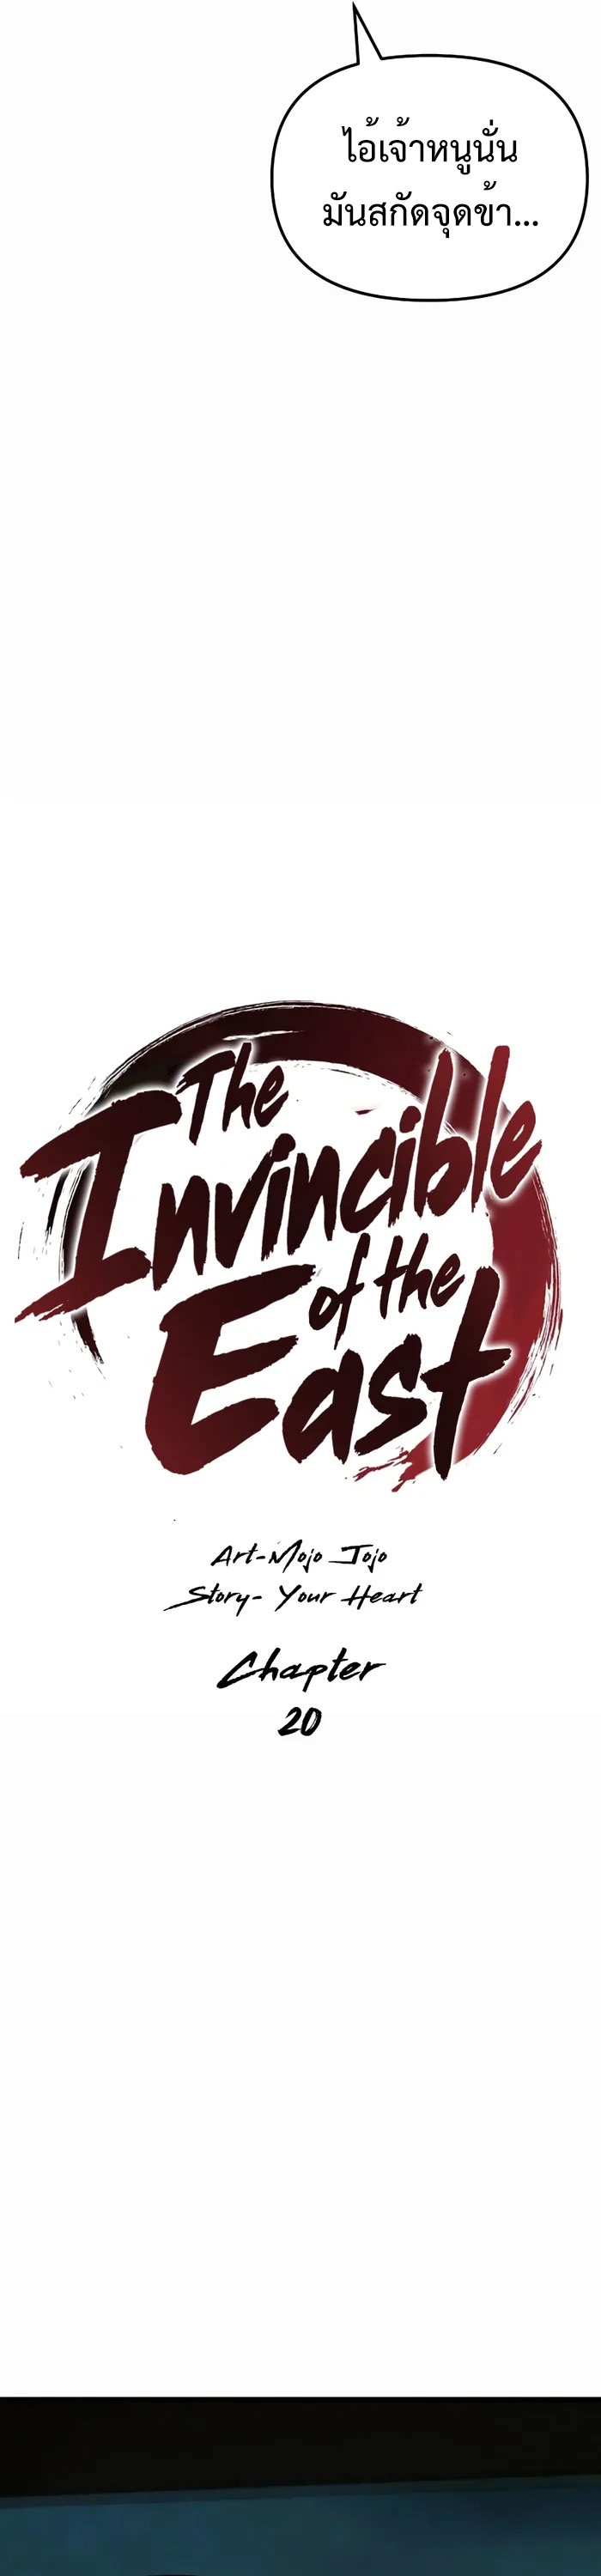 The Invincible Of The East 20 (11) 001